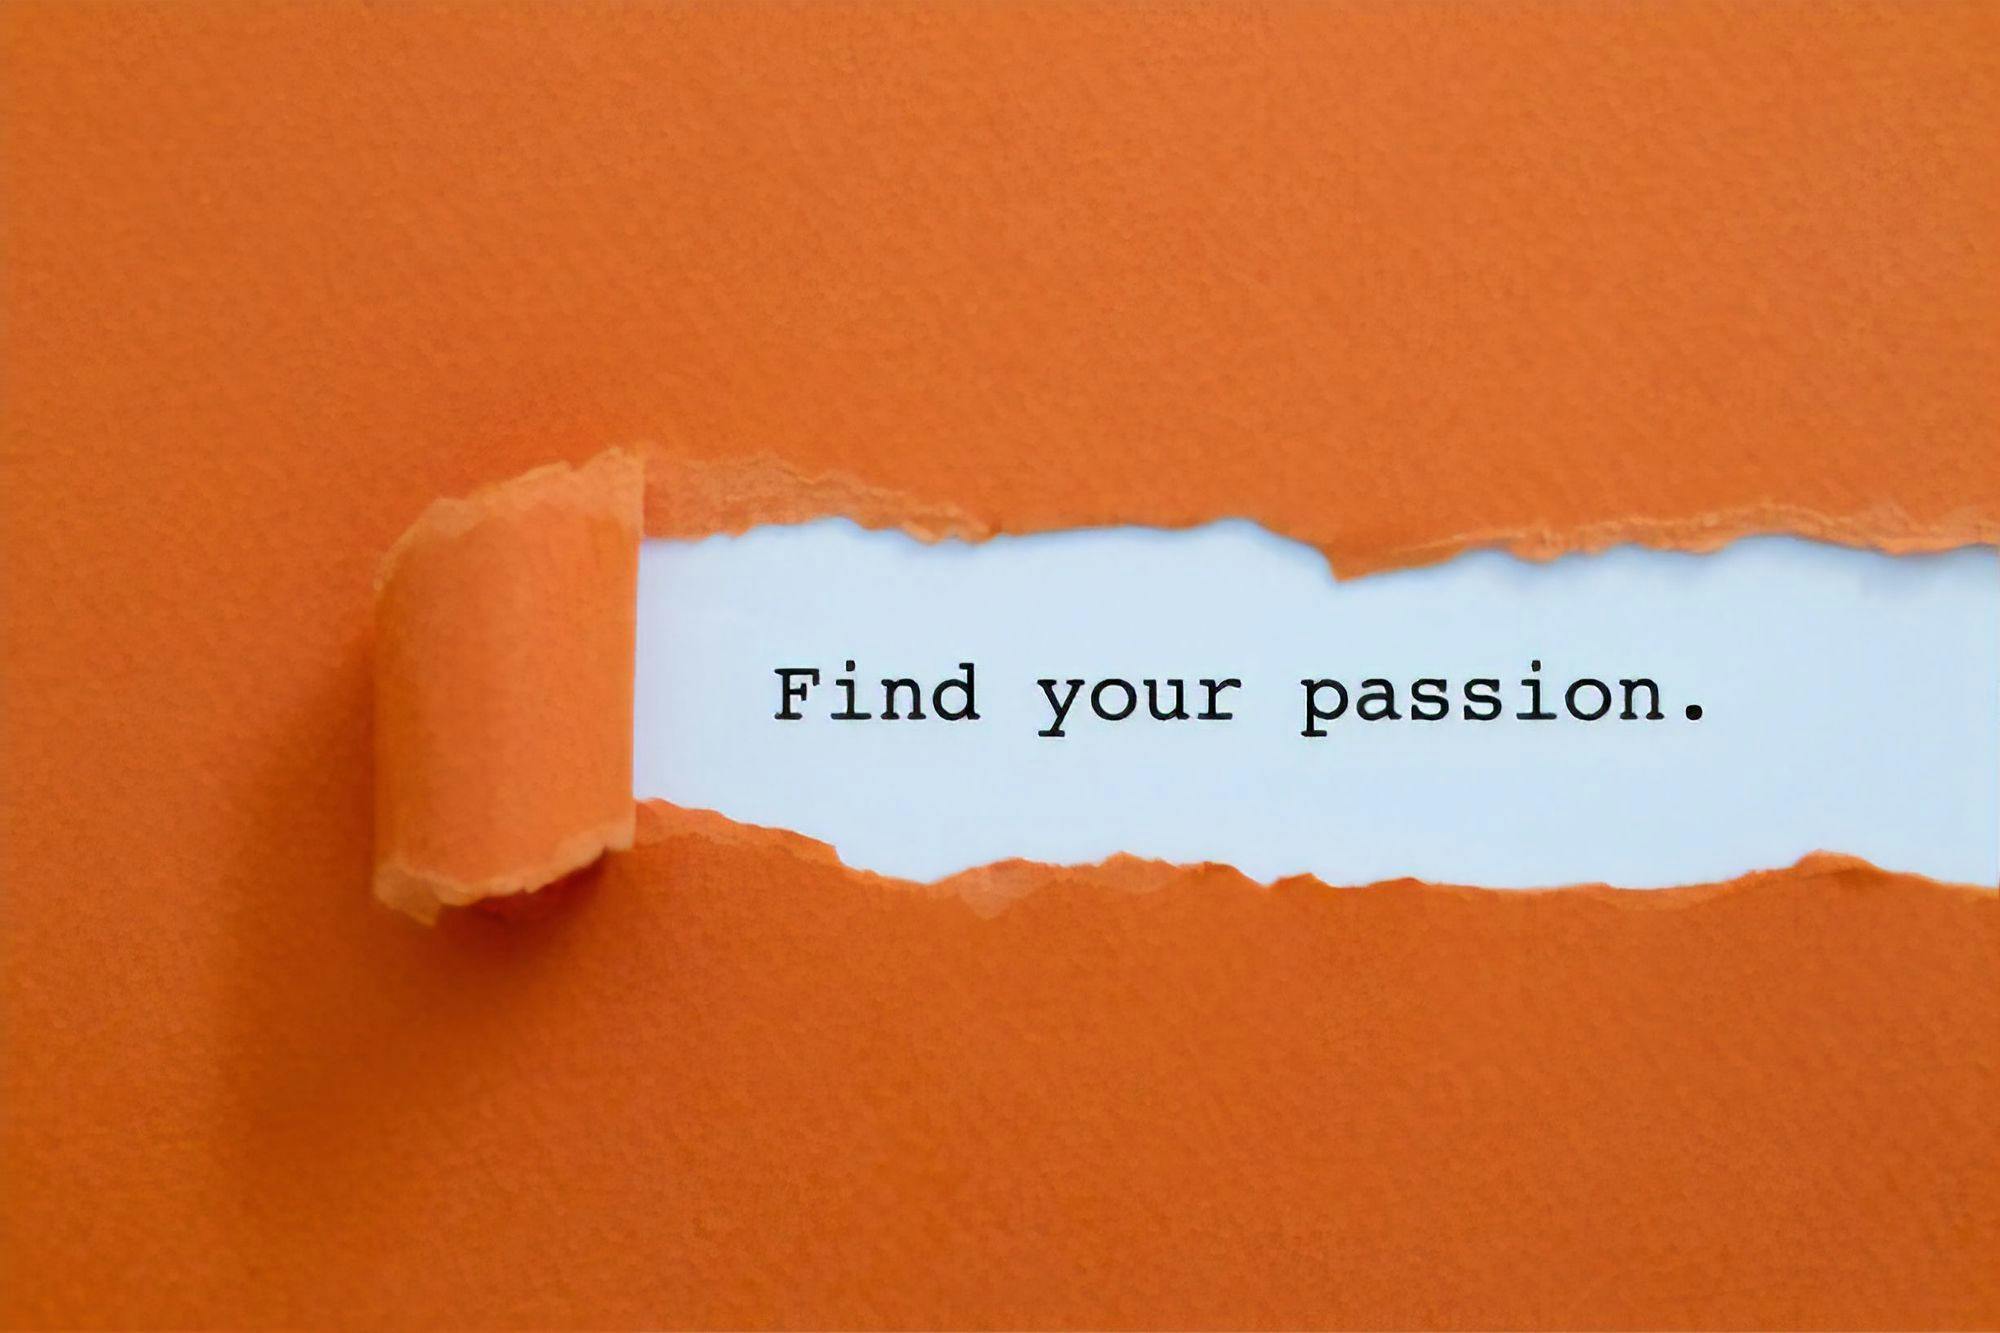 Finding Your Passion as a Developer